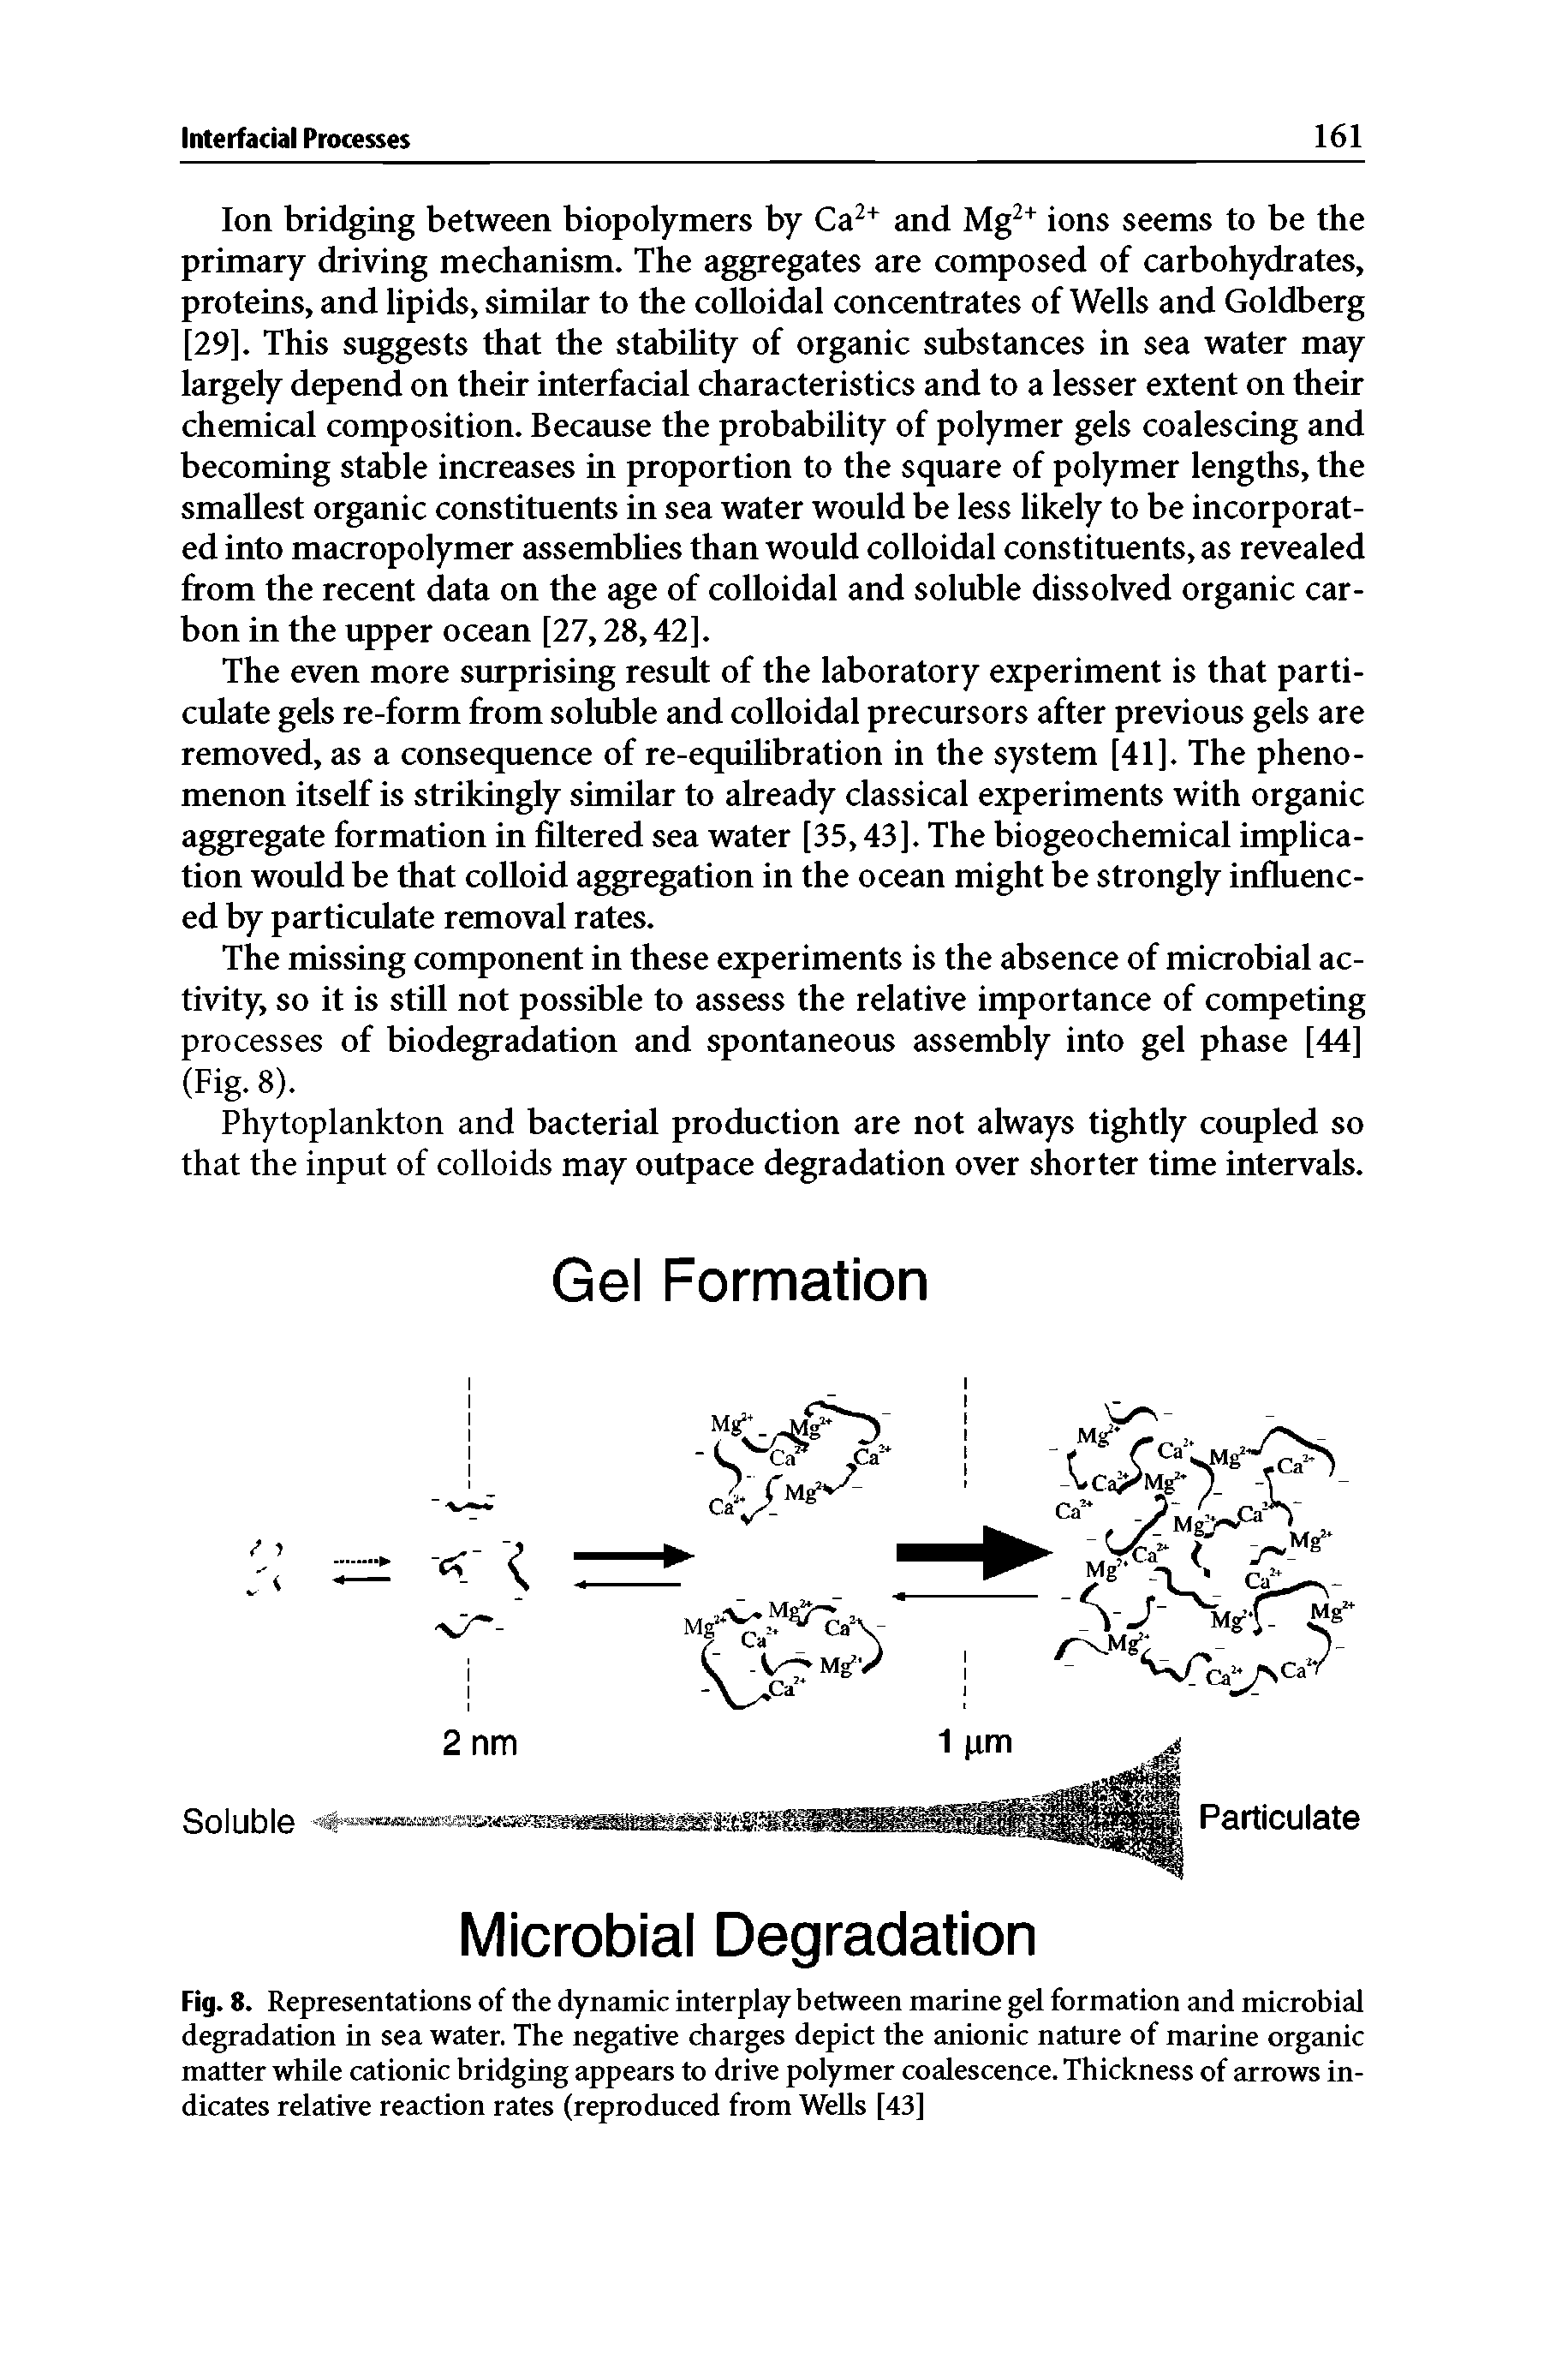 Fig. 8. Representations of the dynamic interplay between marine gel formation and microbial degradation in sea water. The negative charges depict the anionic nature of marine organic matter while cationic bridging appears to drive polymer coalescence. Thickness of arrows indicates relative reaction rates (reproduced from Wells [43]...